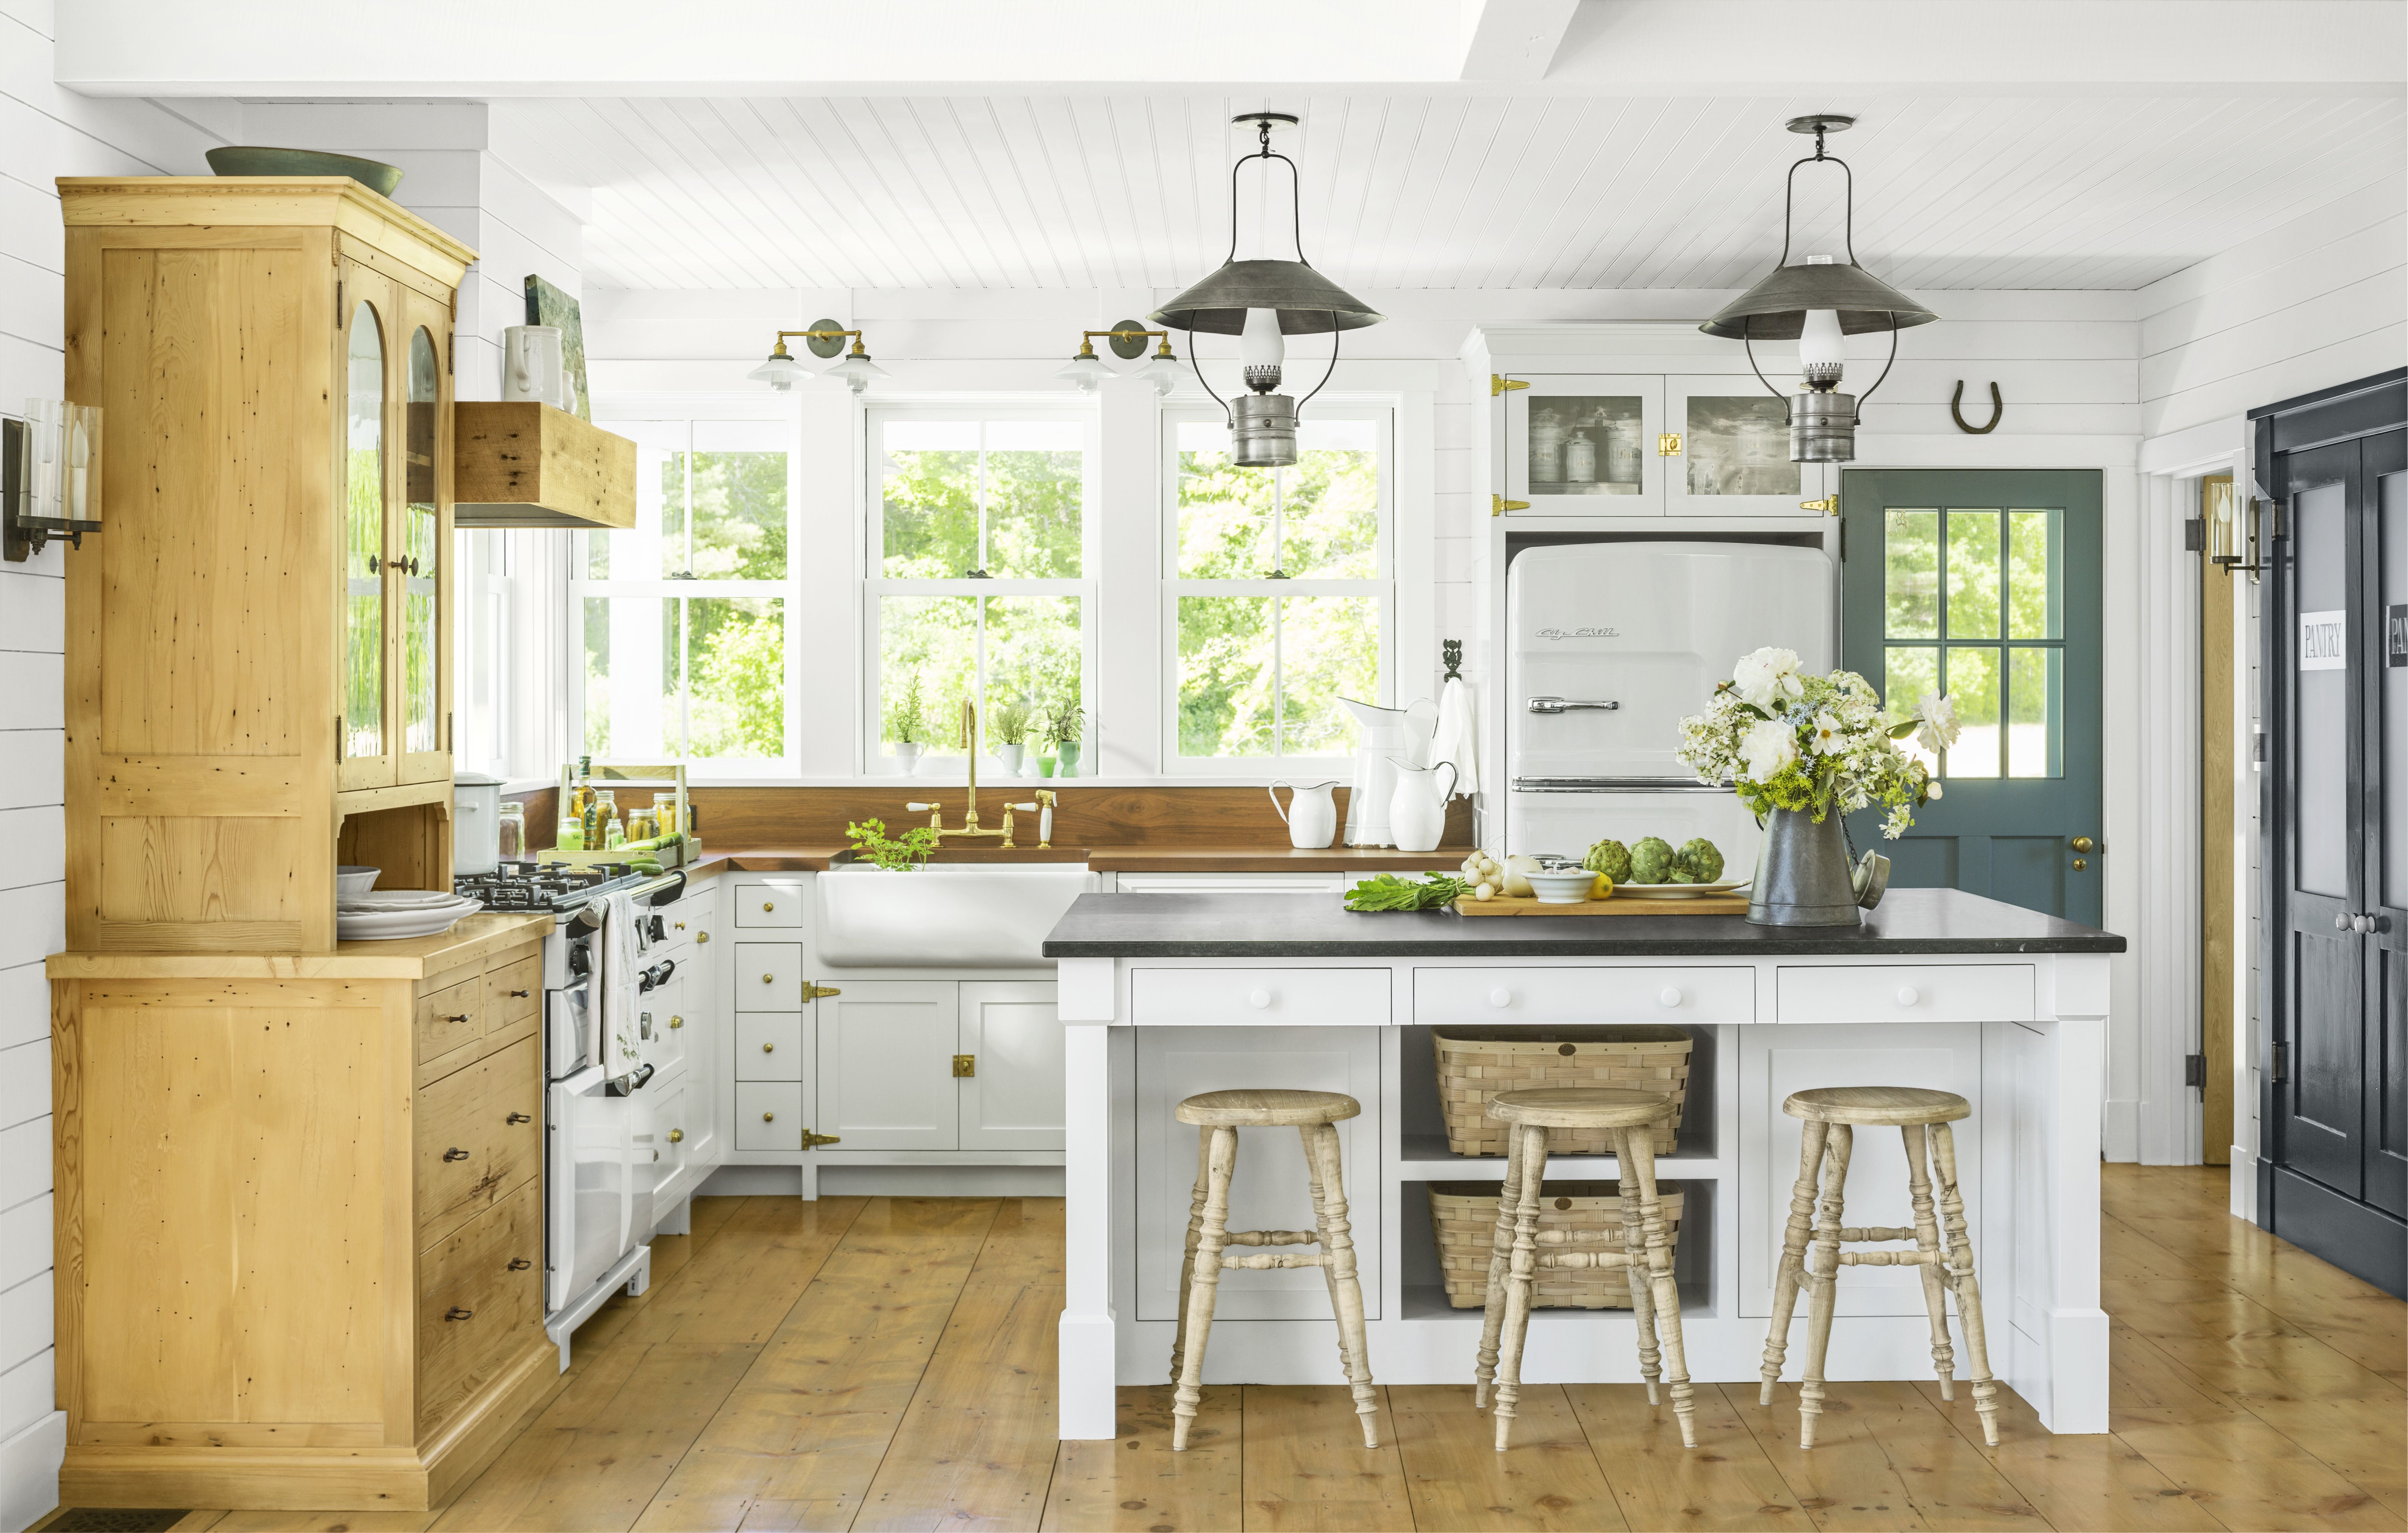 The Single Strategy To Use For How To Paint Laminate Kitchen Cabinets + Tips For A Long ...